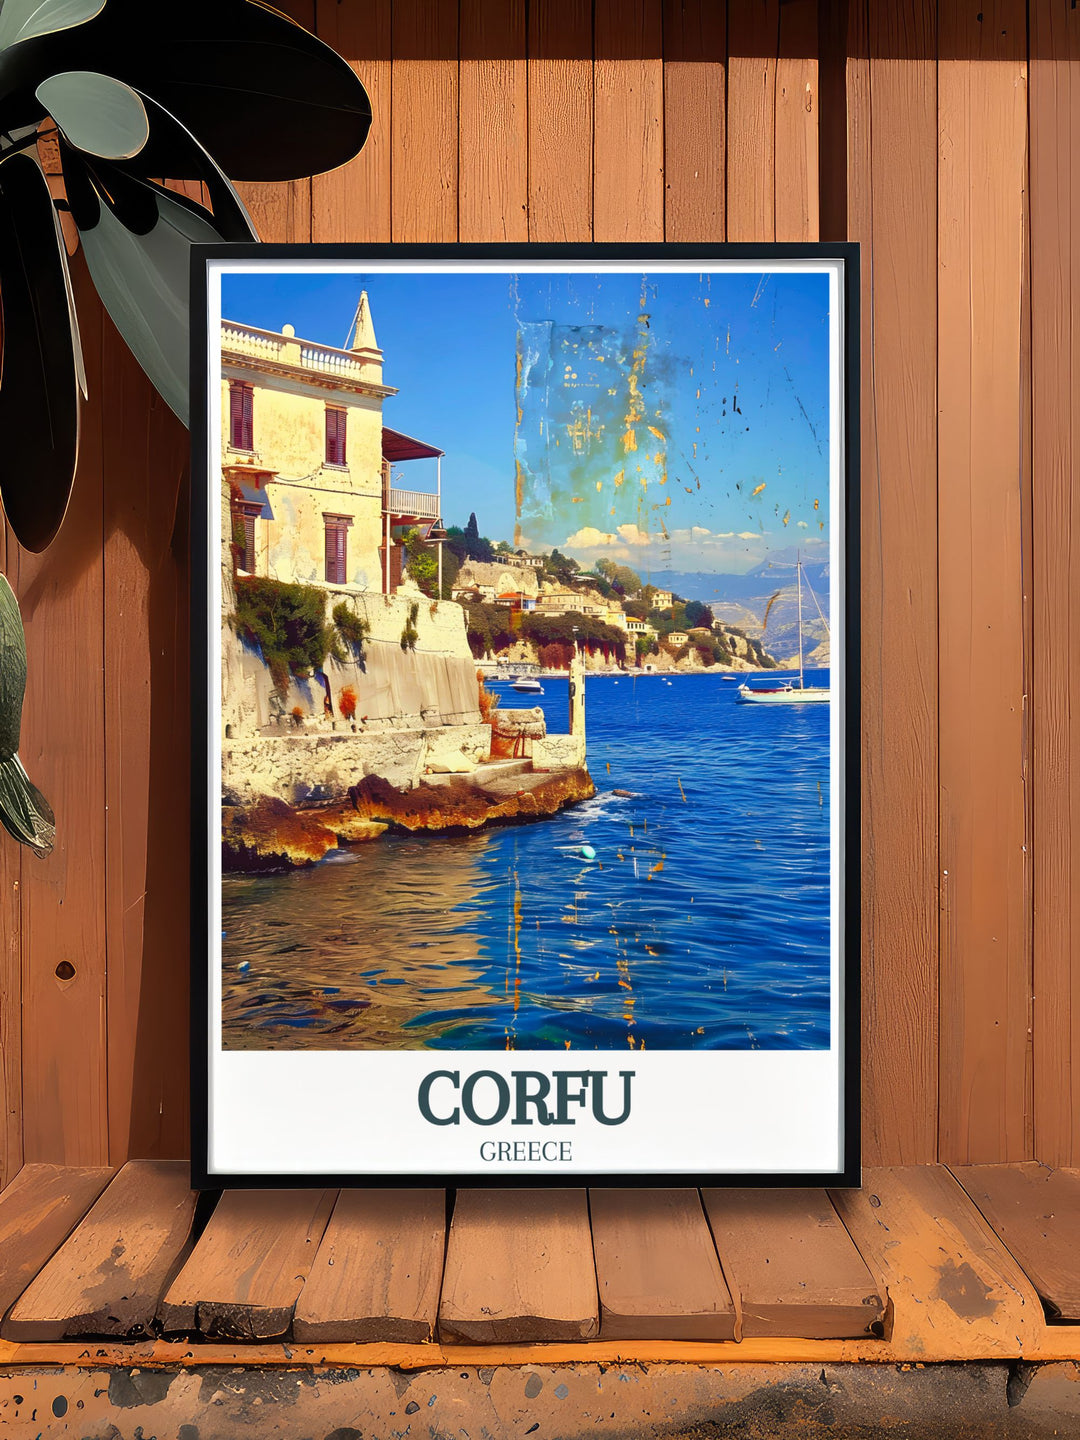 Vivid Corfu travel art featuring the Old fortress of Corfu Ionian Sea a captivating piece that transports viewers to the serene shores of Corfu Greece Island perfect for home decor or as a special gift for those who cherish Mediterranean landscapes and Greek culture